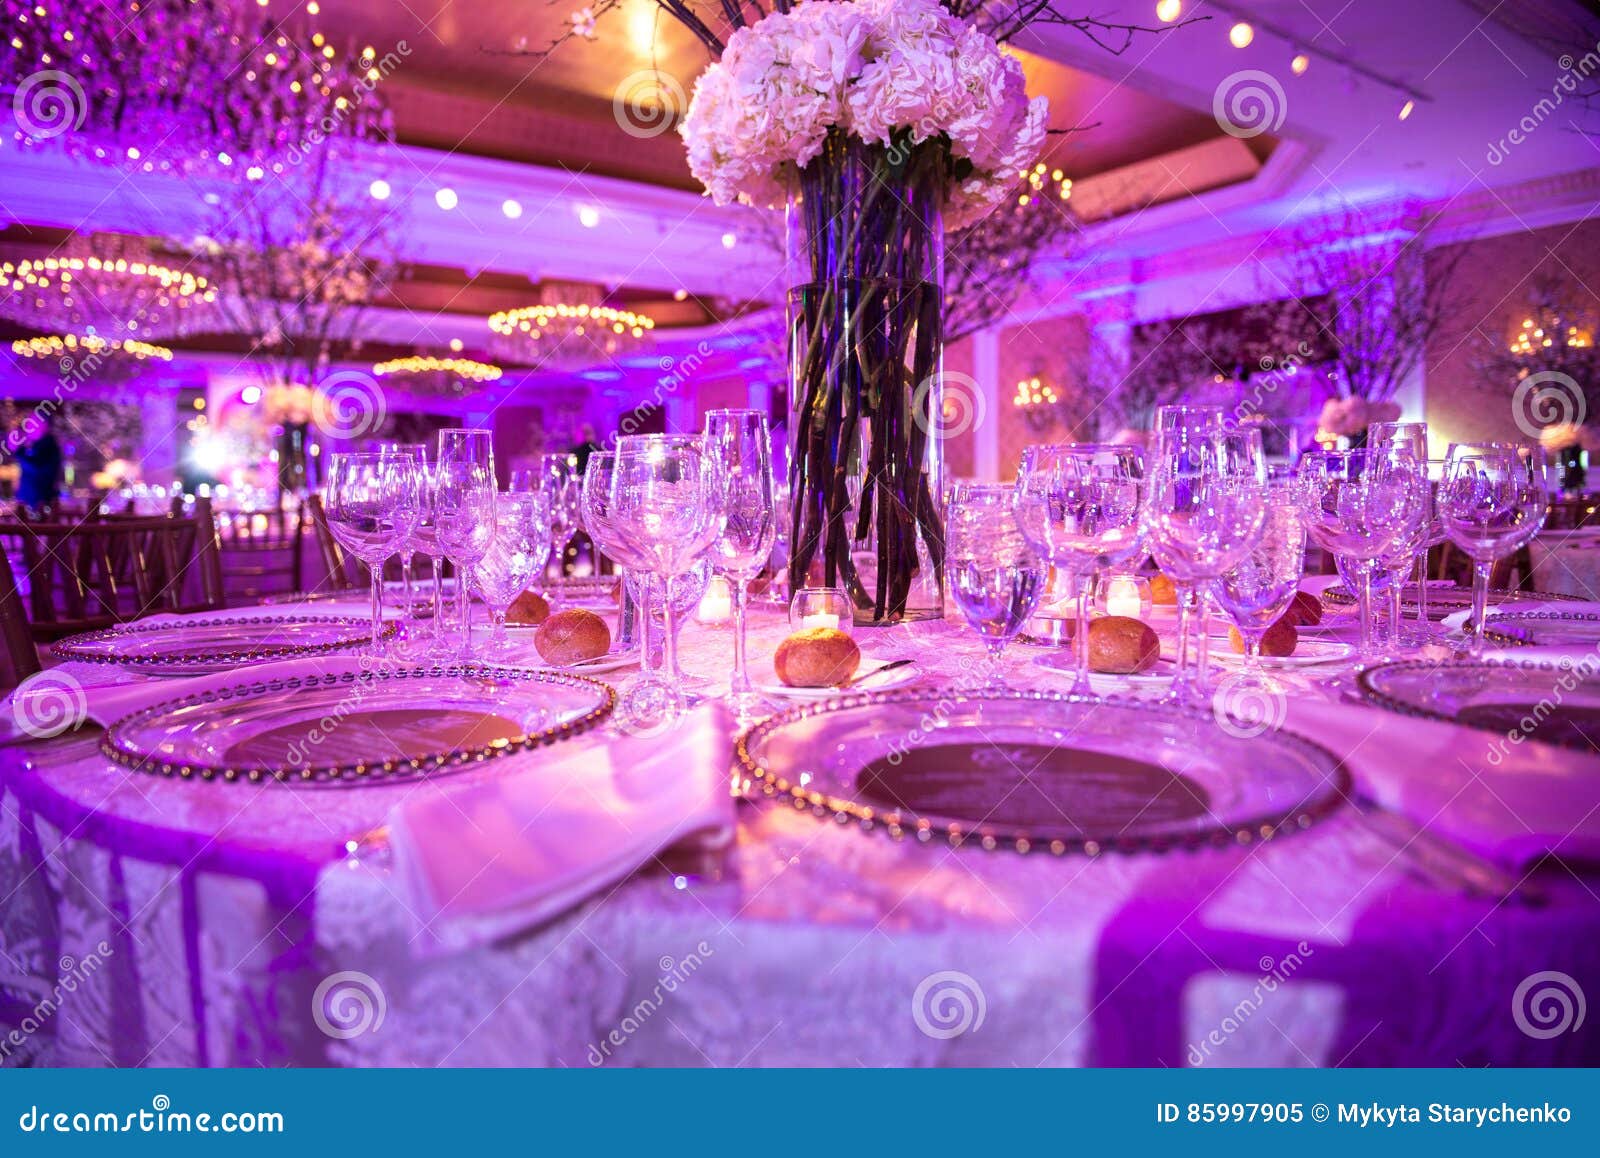 Served Table For Dinner On The Wedding Party At Luxury Hotel Restaurant Stock Image Image Of